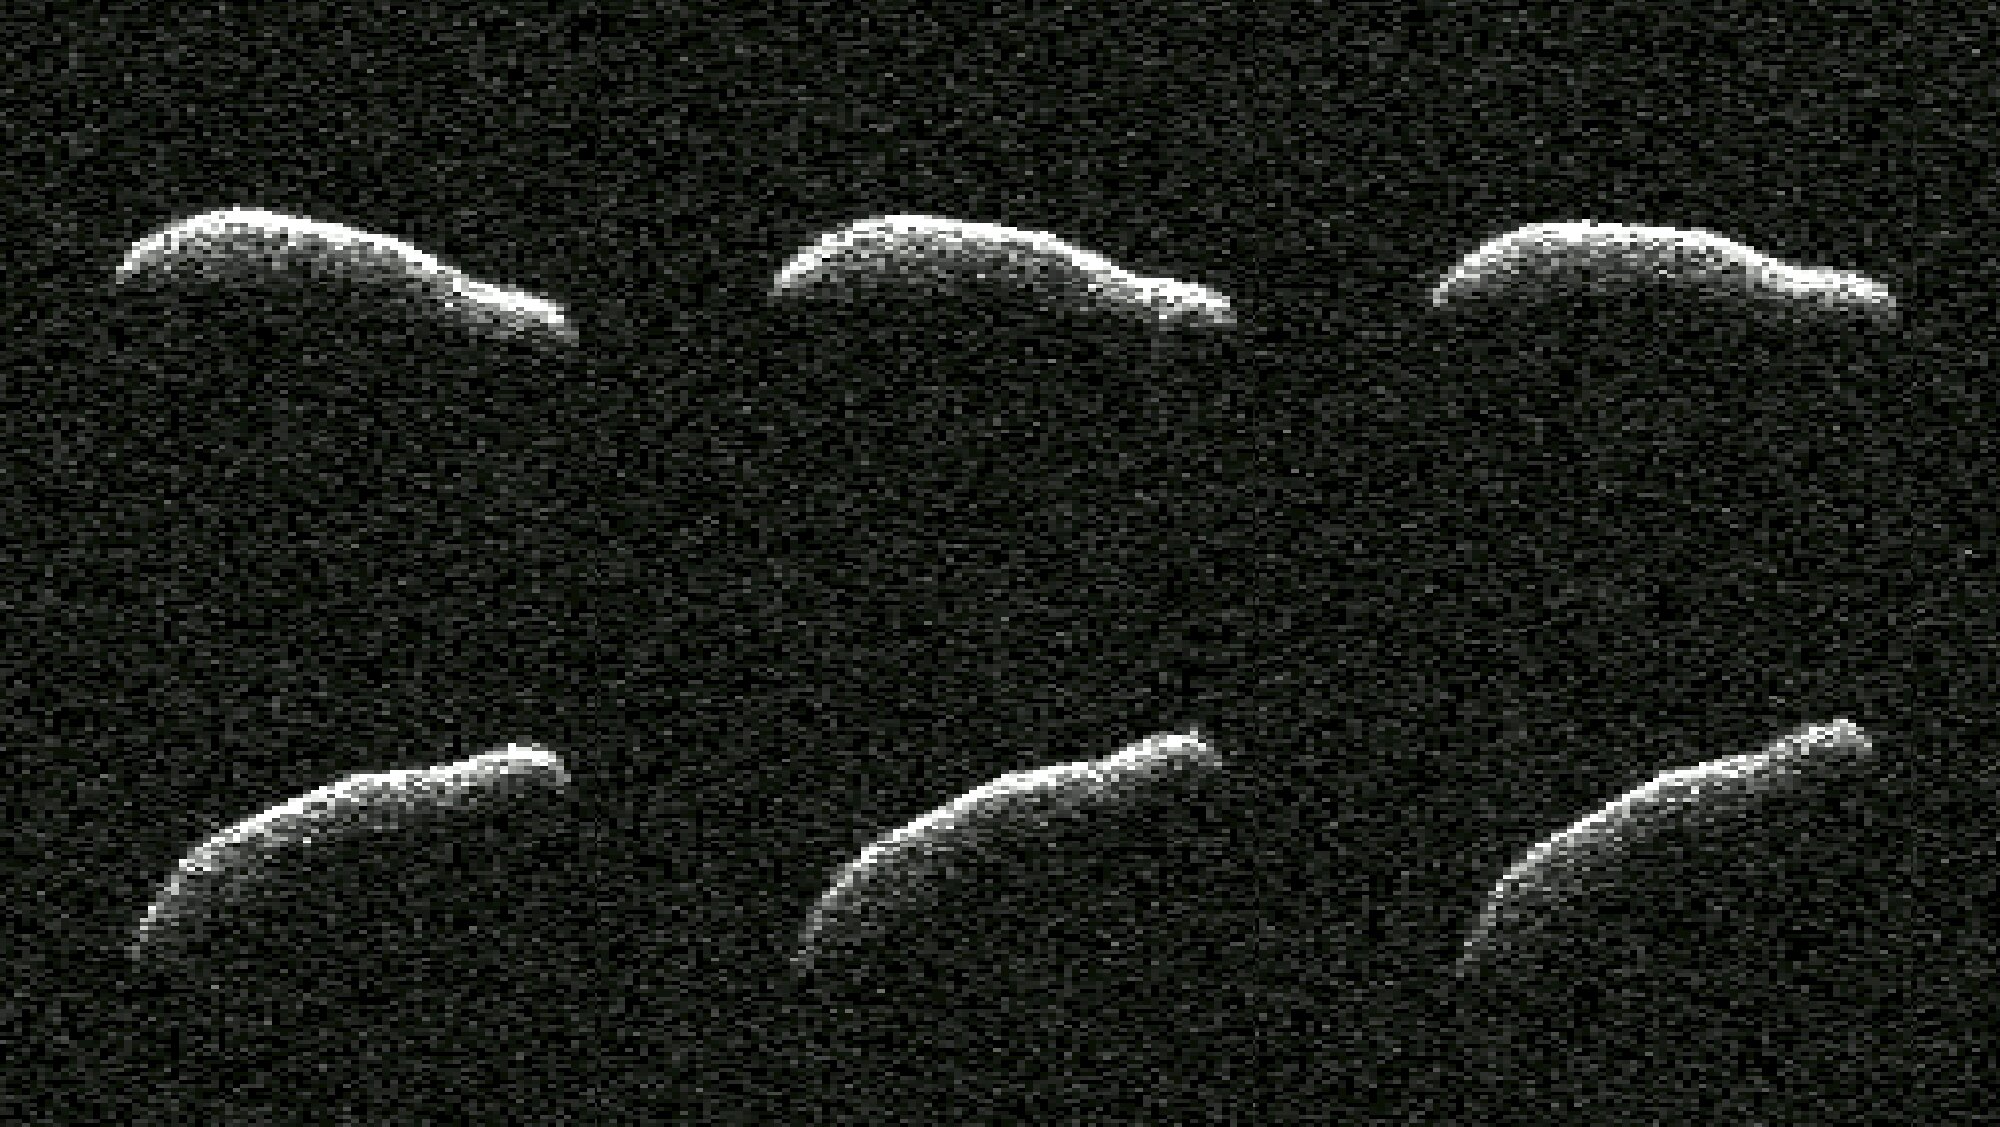 #NASA’s planetary radar captures detailed view of oblong asteroid